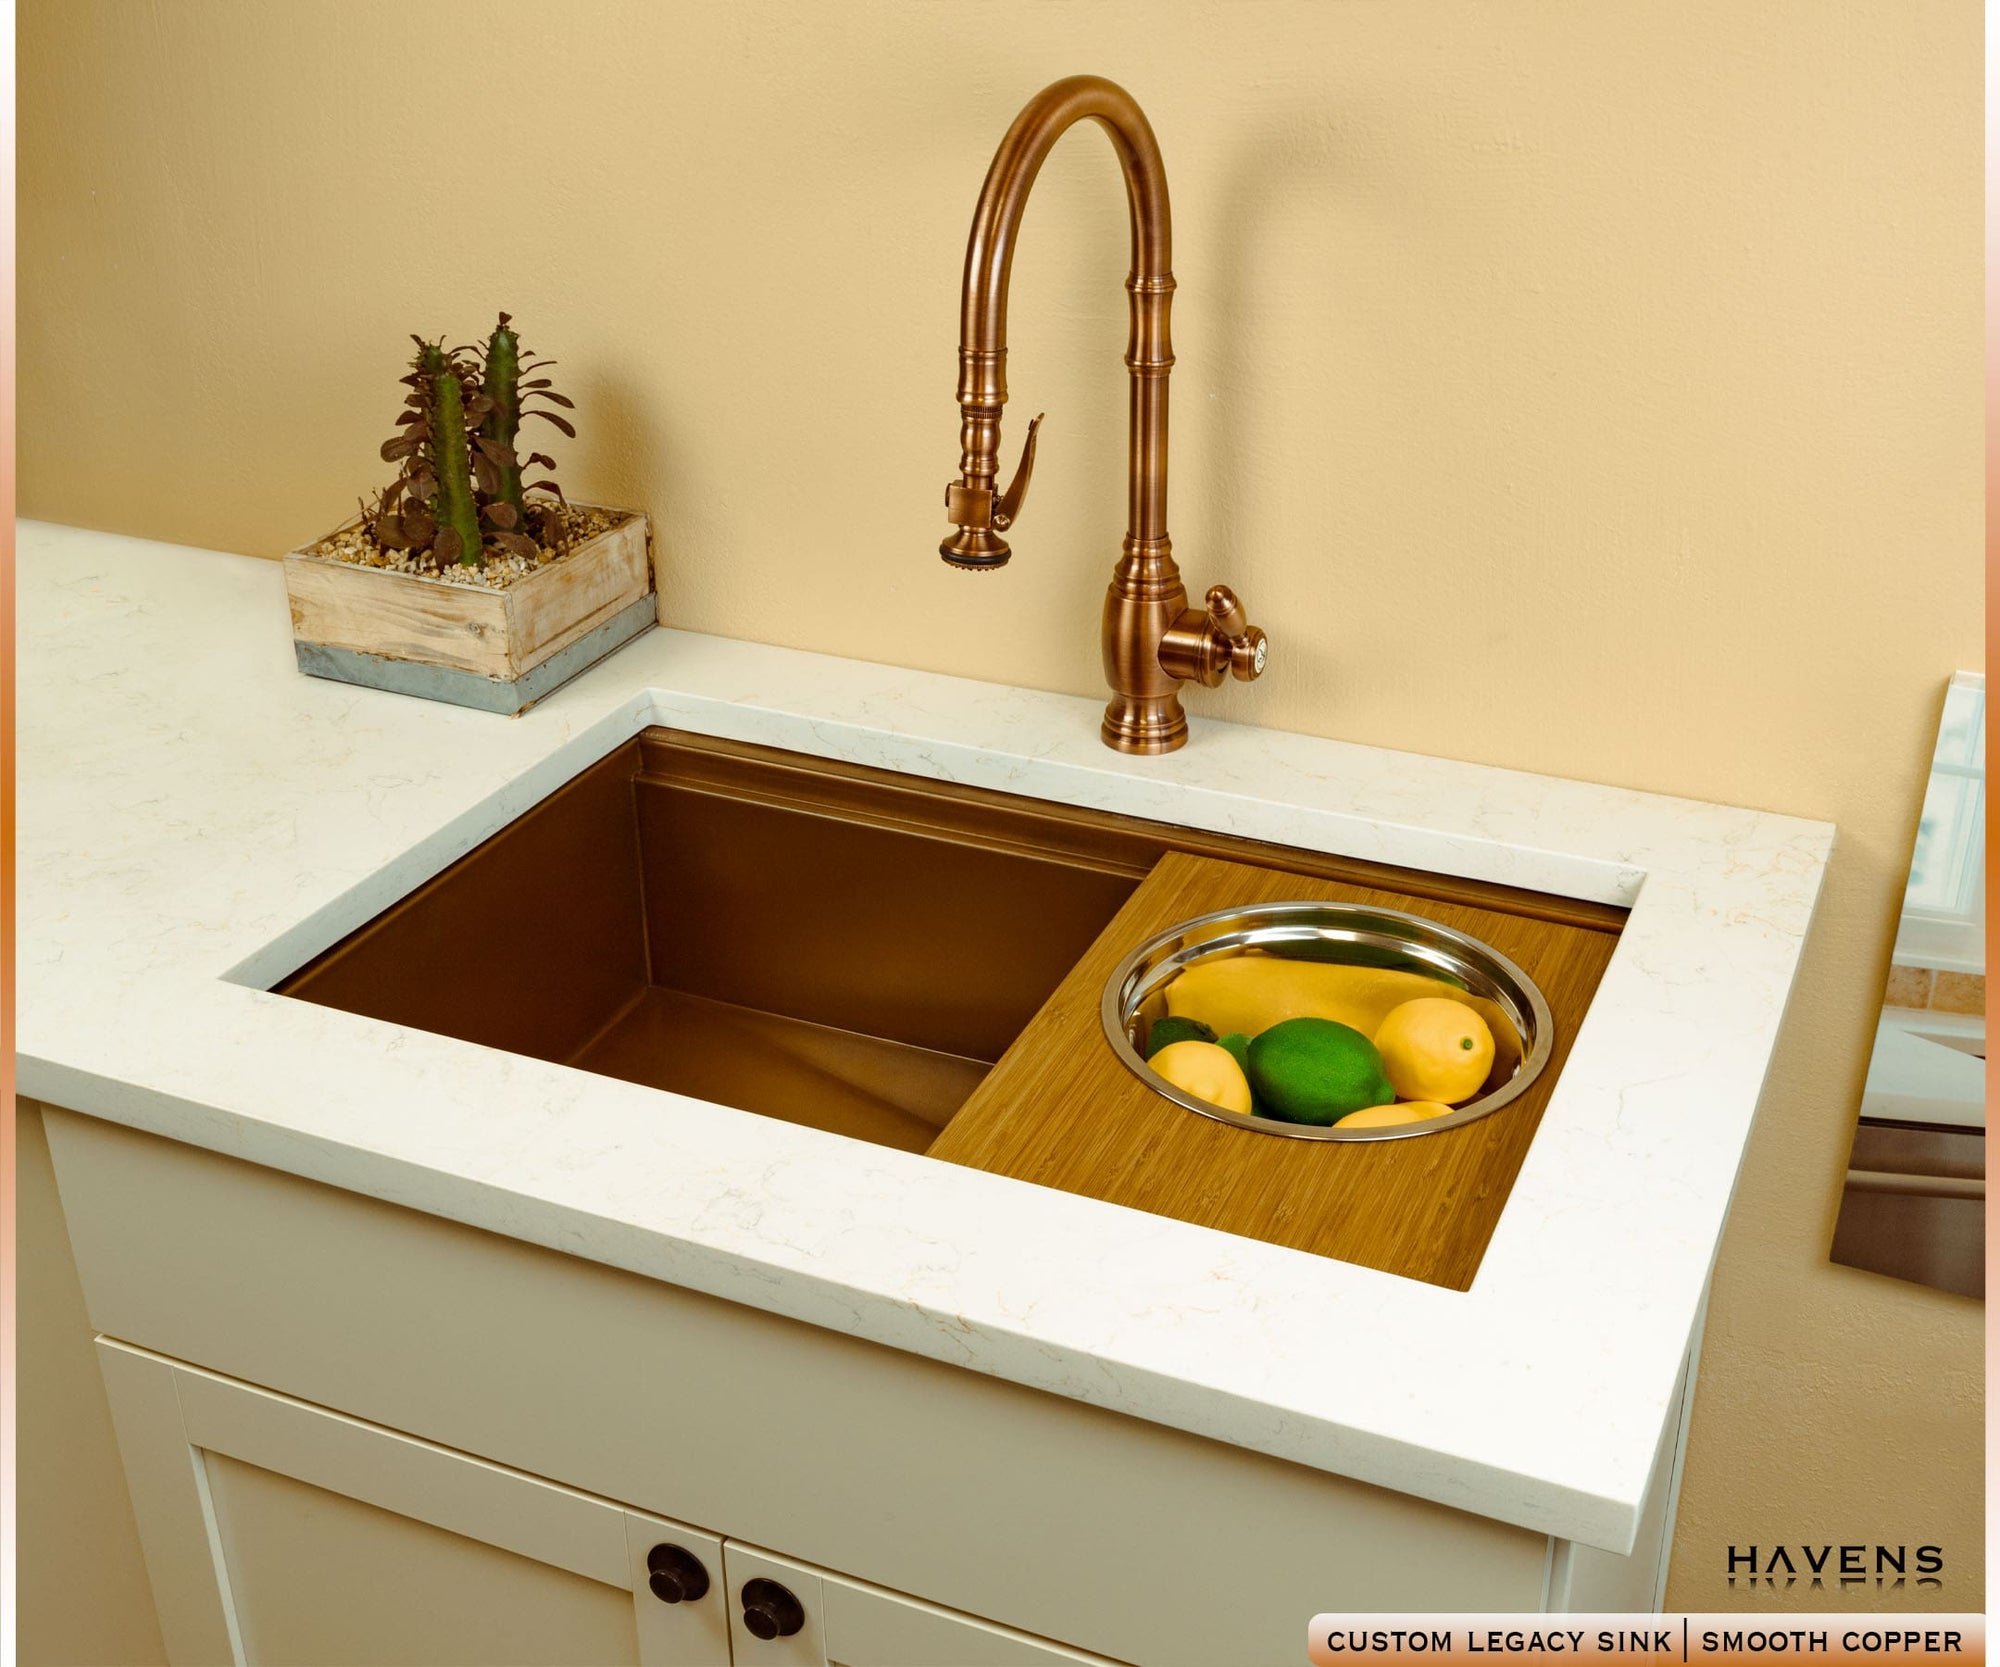 Havens Copper Sink with Amber Bamboo Mixing Cutting Board on sink ledge 